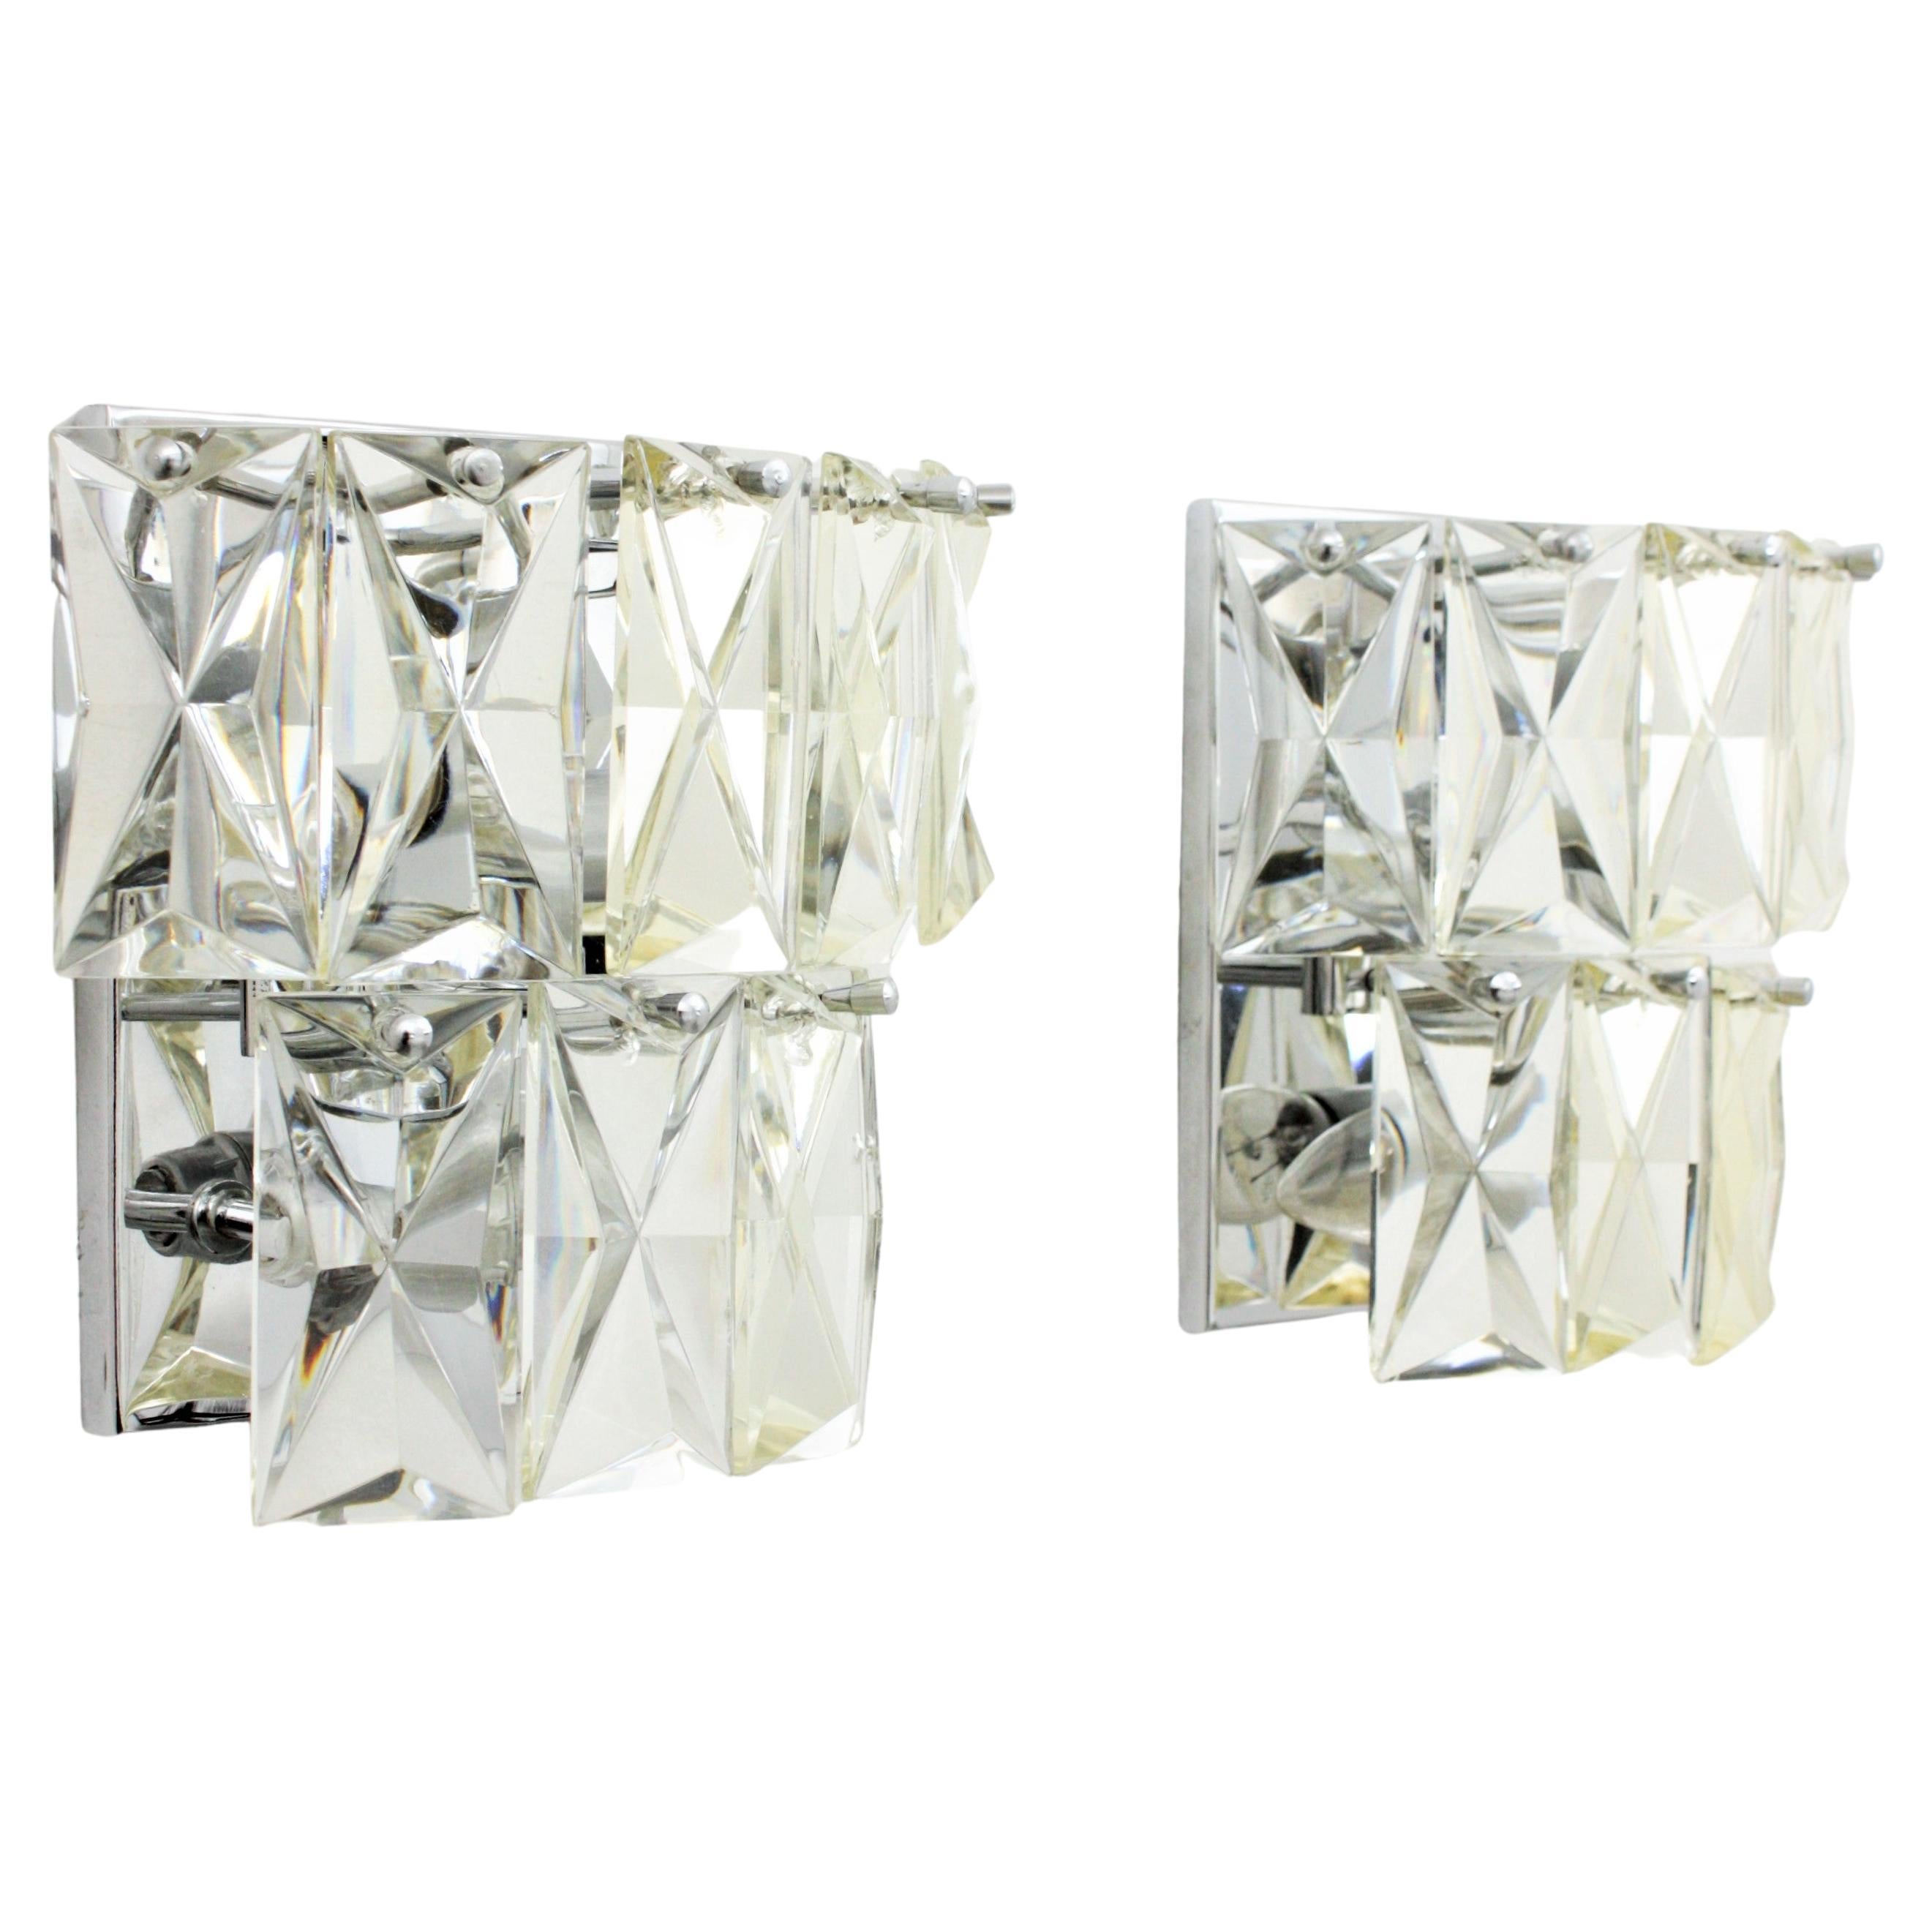 Pair of Crystal Wall Lights, Baccarat Style